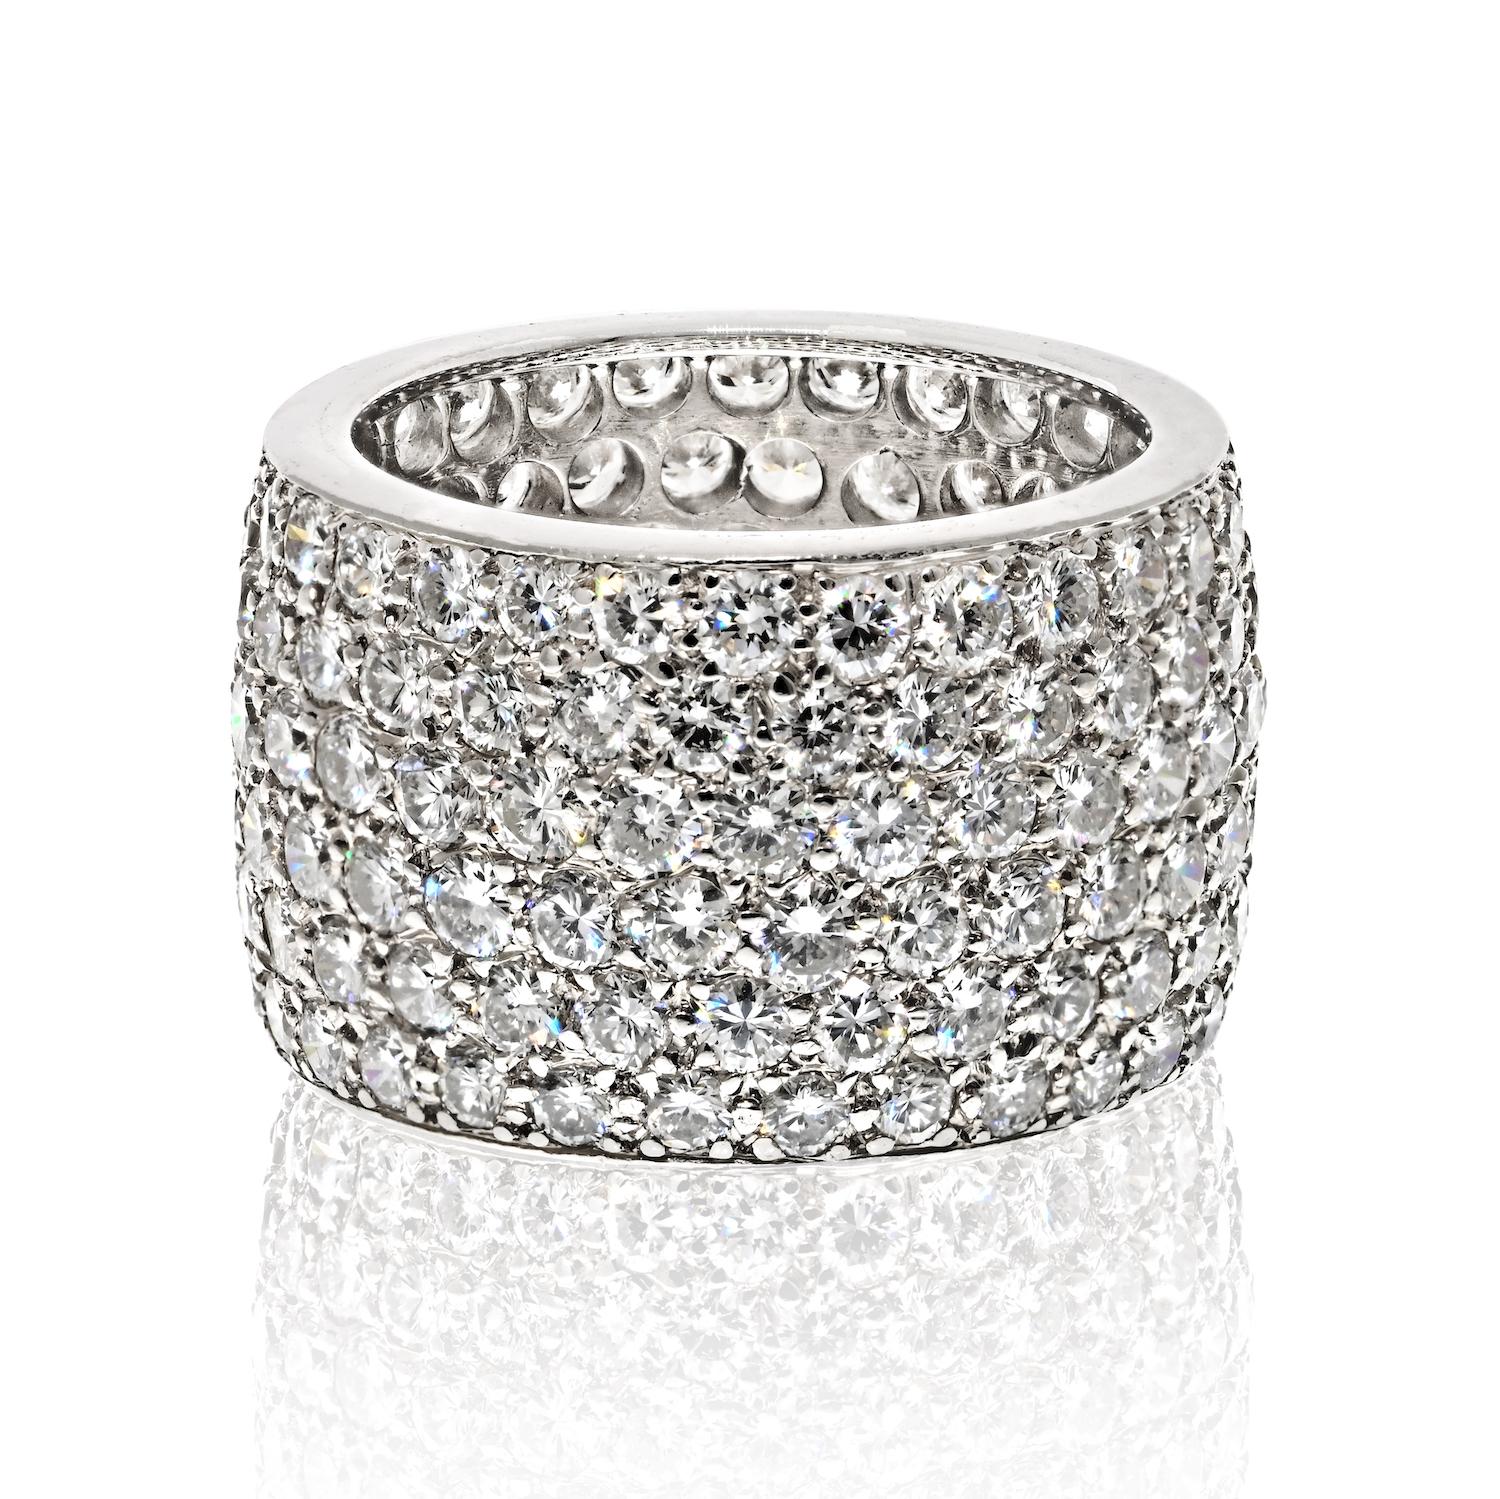 The Van Cleef & Arpels multi-row diamond ring is a truly stunning piece of jewelry. 

It features six rows of brilliant-cut diamonds that are expertly set to create a dazzling display of sparkle and shine. Measuring approximately 0.5 inches wide,